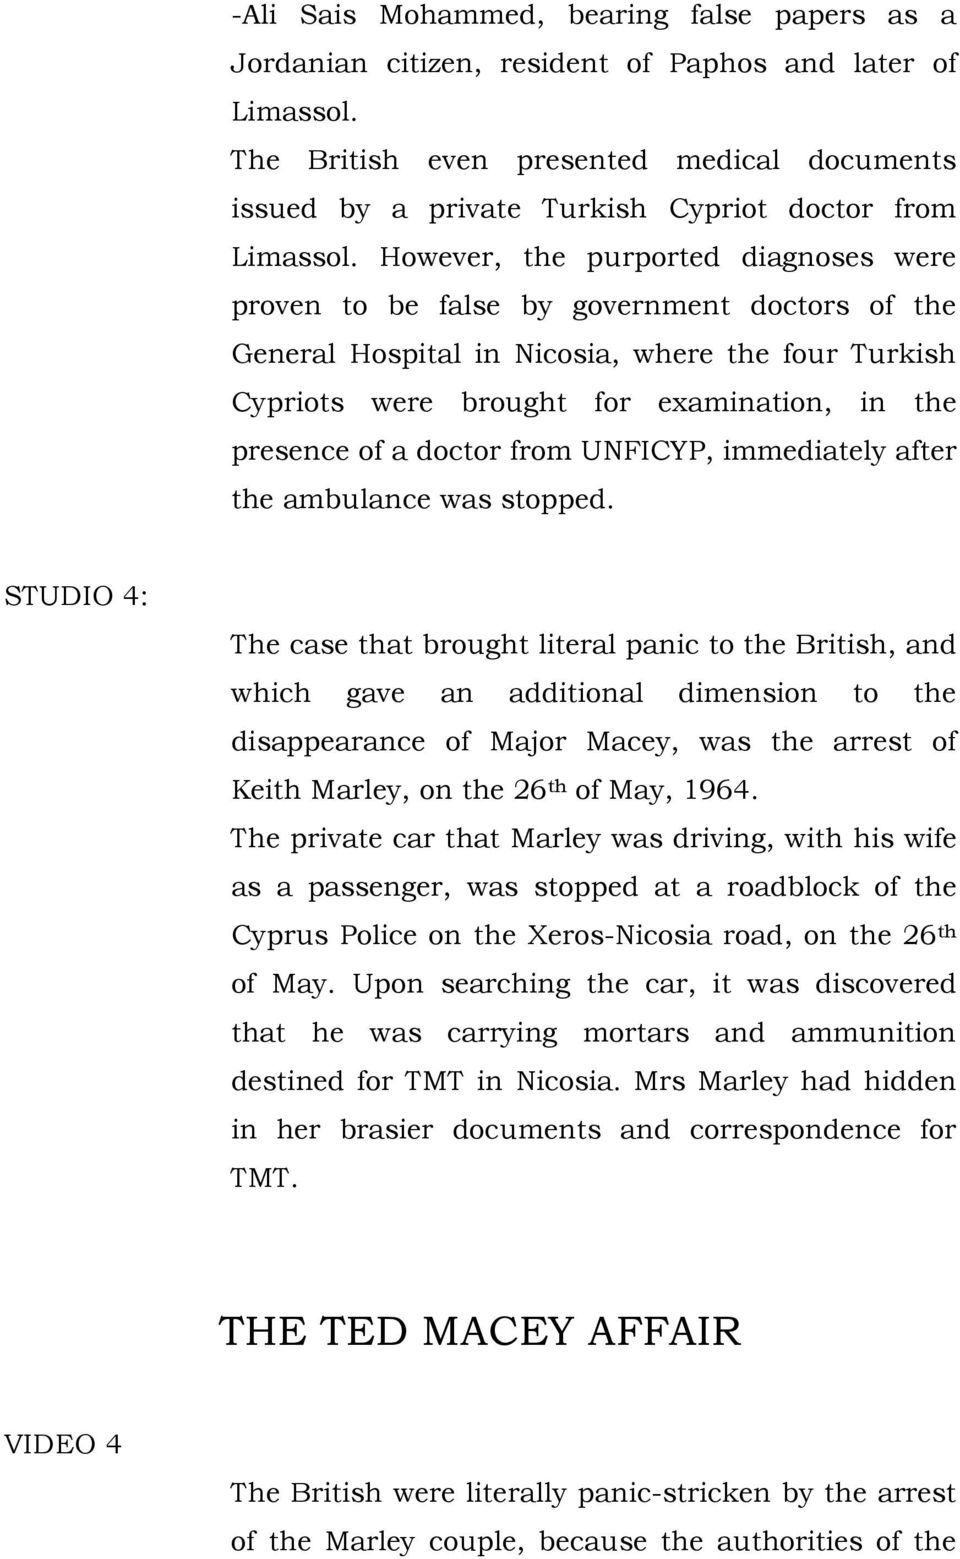 However, the purported diagnoses were proven to be false by government doctors of the General Hospital in Nicosia, where the four Turkish Cypriots were brought for examination, in the presence of a